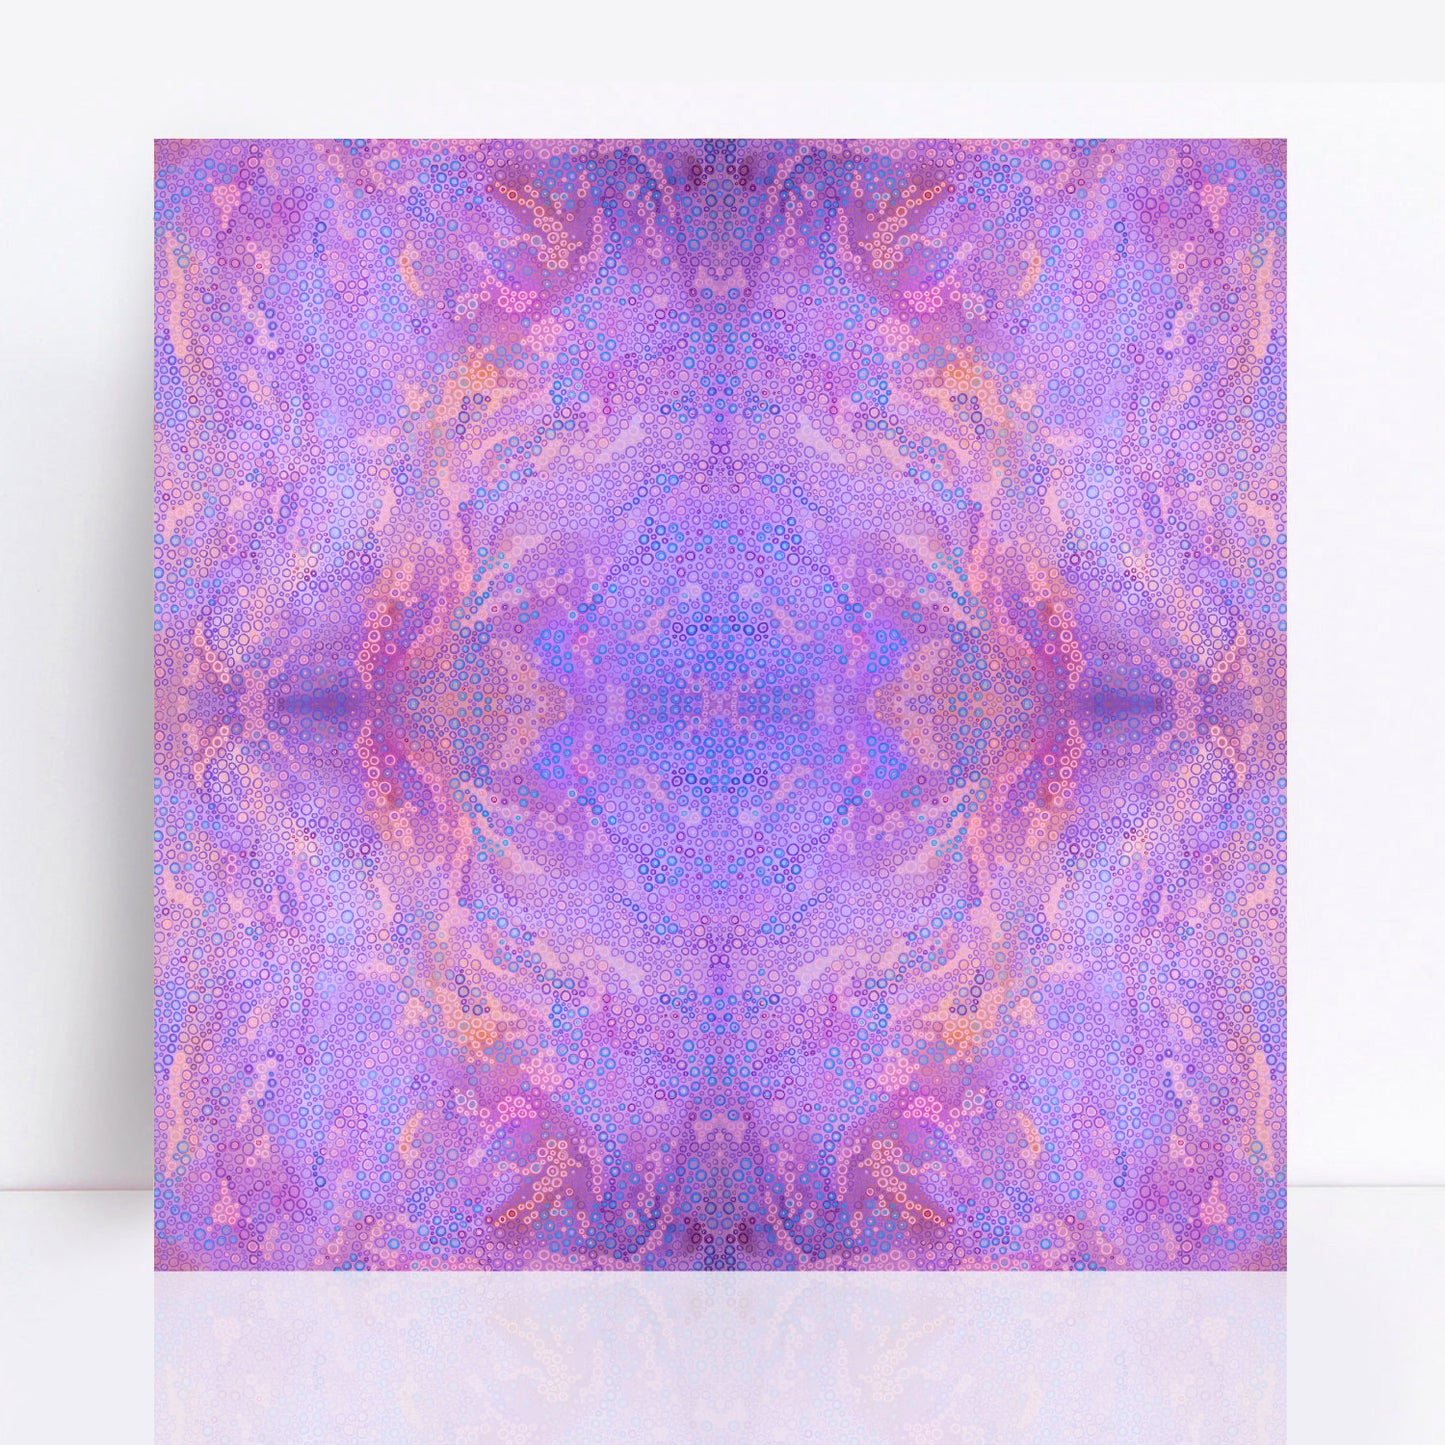 A limited edition canvas print titled "Jacaranda Season," featuring a vibrant abstract design with hundreds of meticulously arranged dots and circles in various sizes. The artwork showcases a harmonious blend of purples and pinks, inspired by the hues of jacaranda blossoms. The print is displayed against a white background, highlighting its intricate and captivating composition.